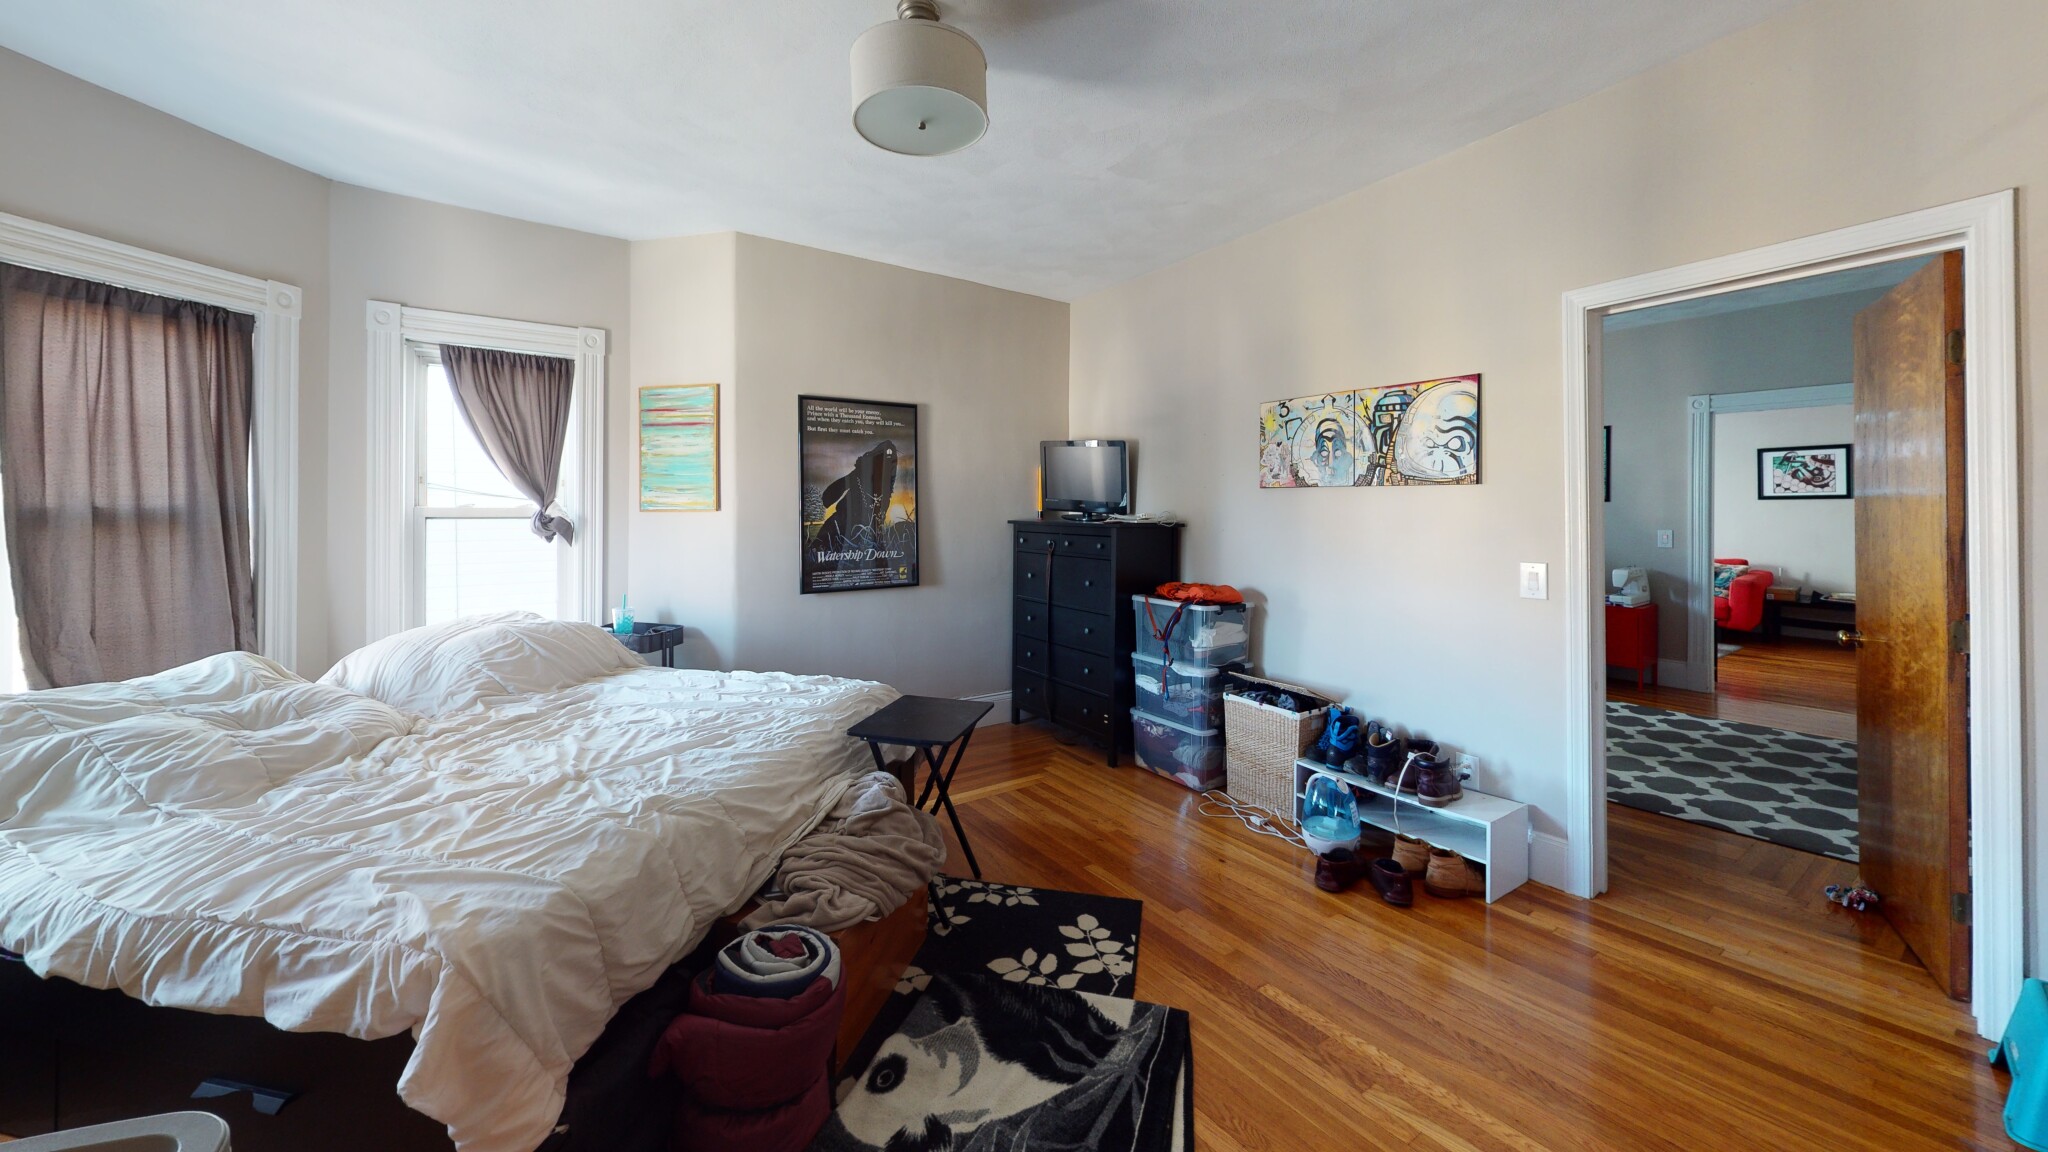 Photos of apartment on School St.,Somerville MA 02145